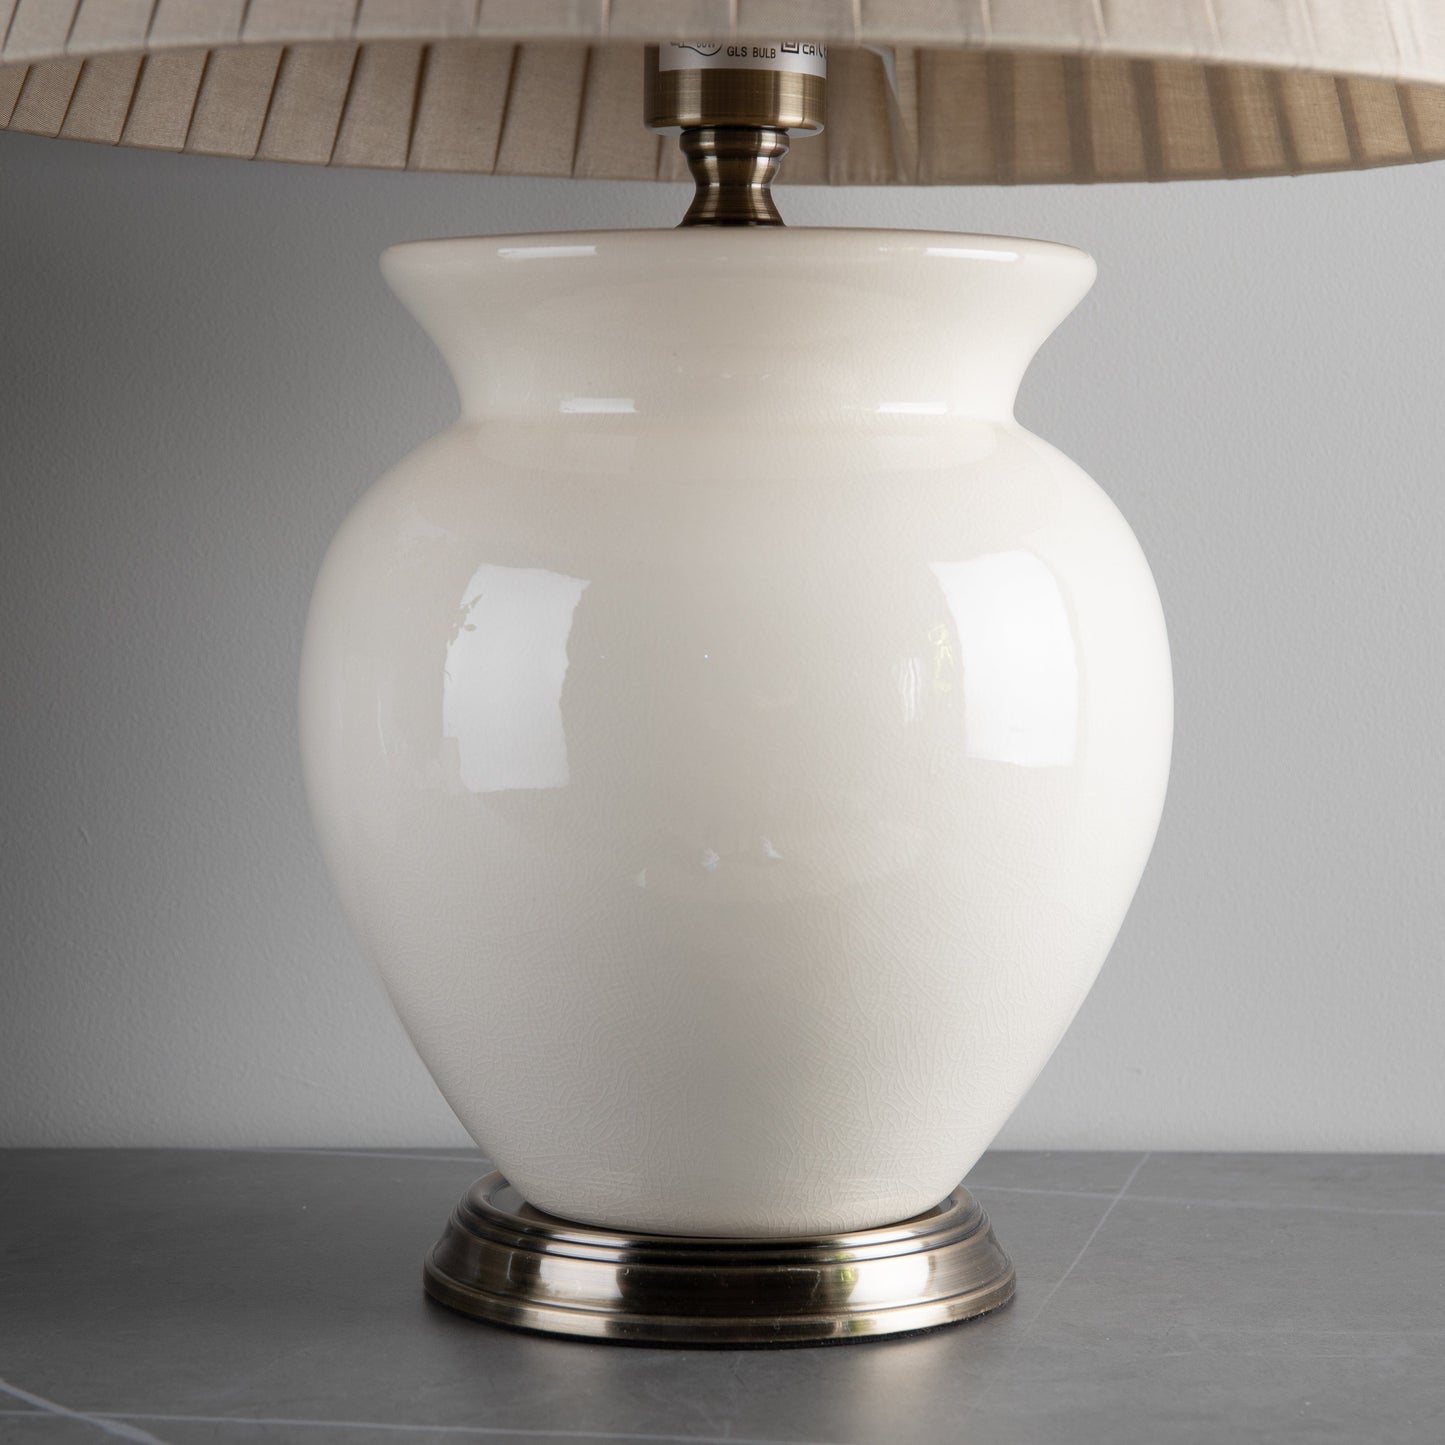 Lights  -  Pacific Lifestyle Ivory Ceramic Table Lamp  -  50105654